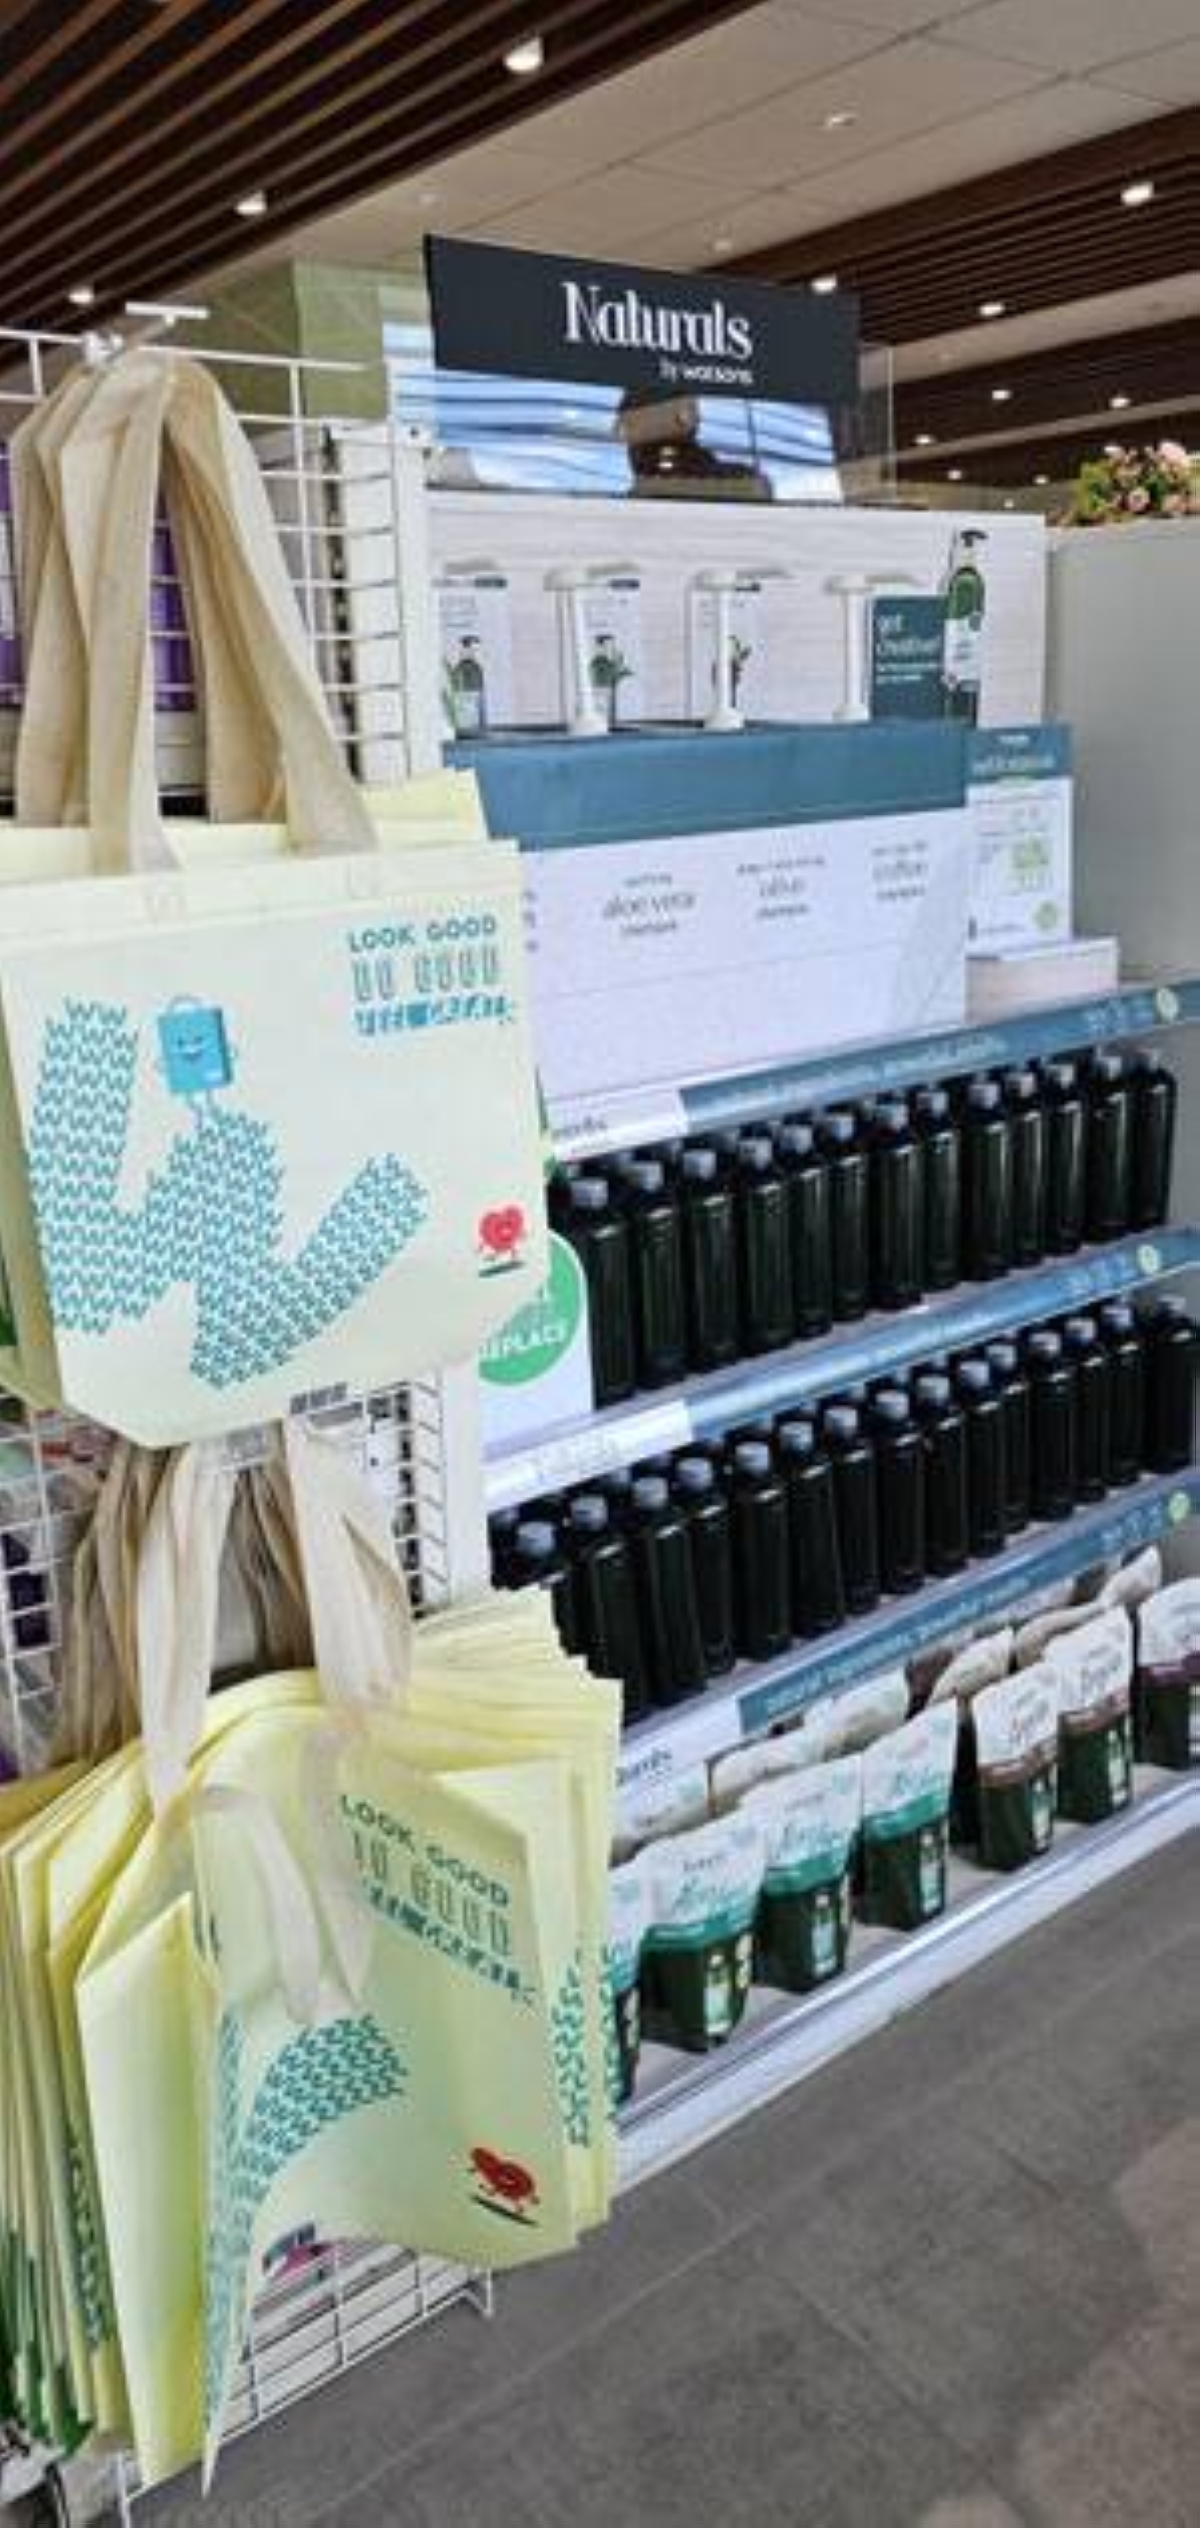 what makes watsons first greener store truly green